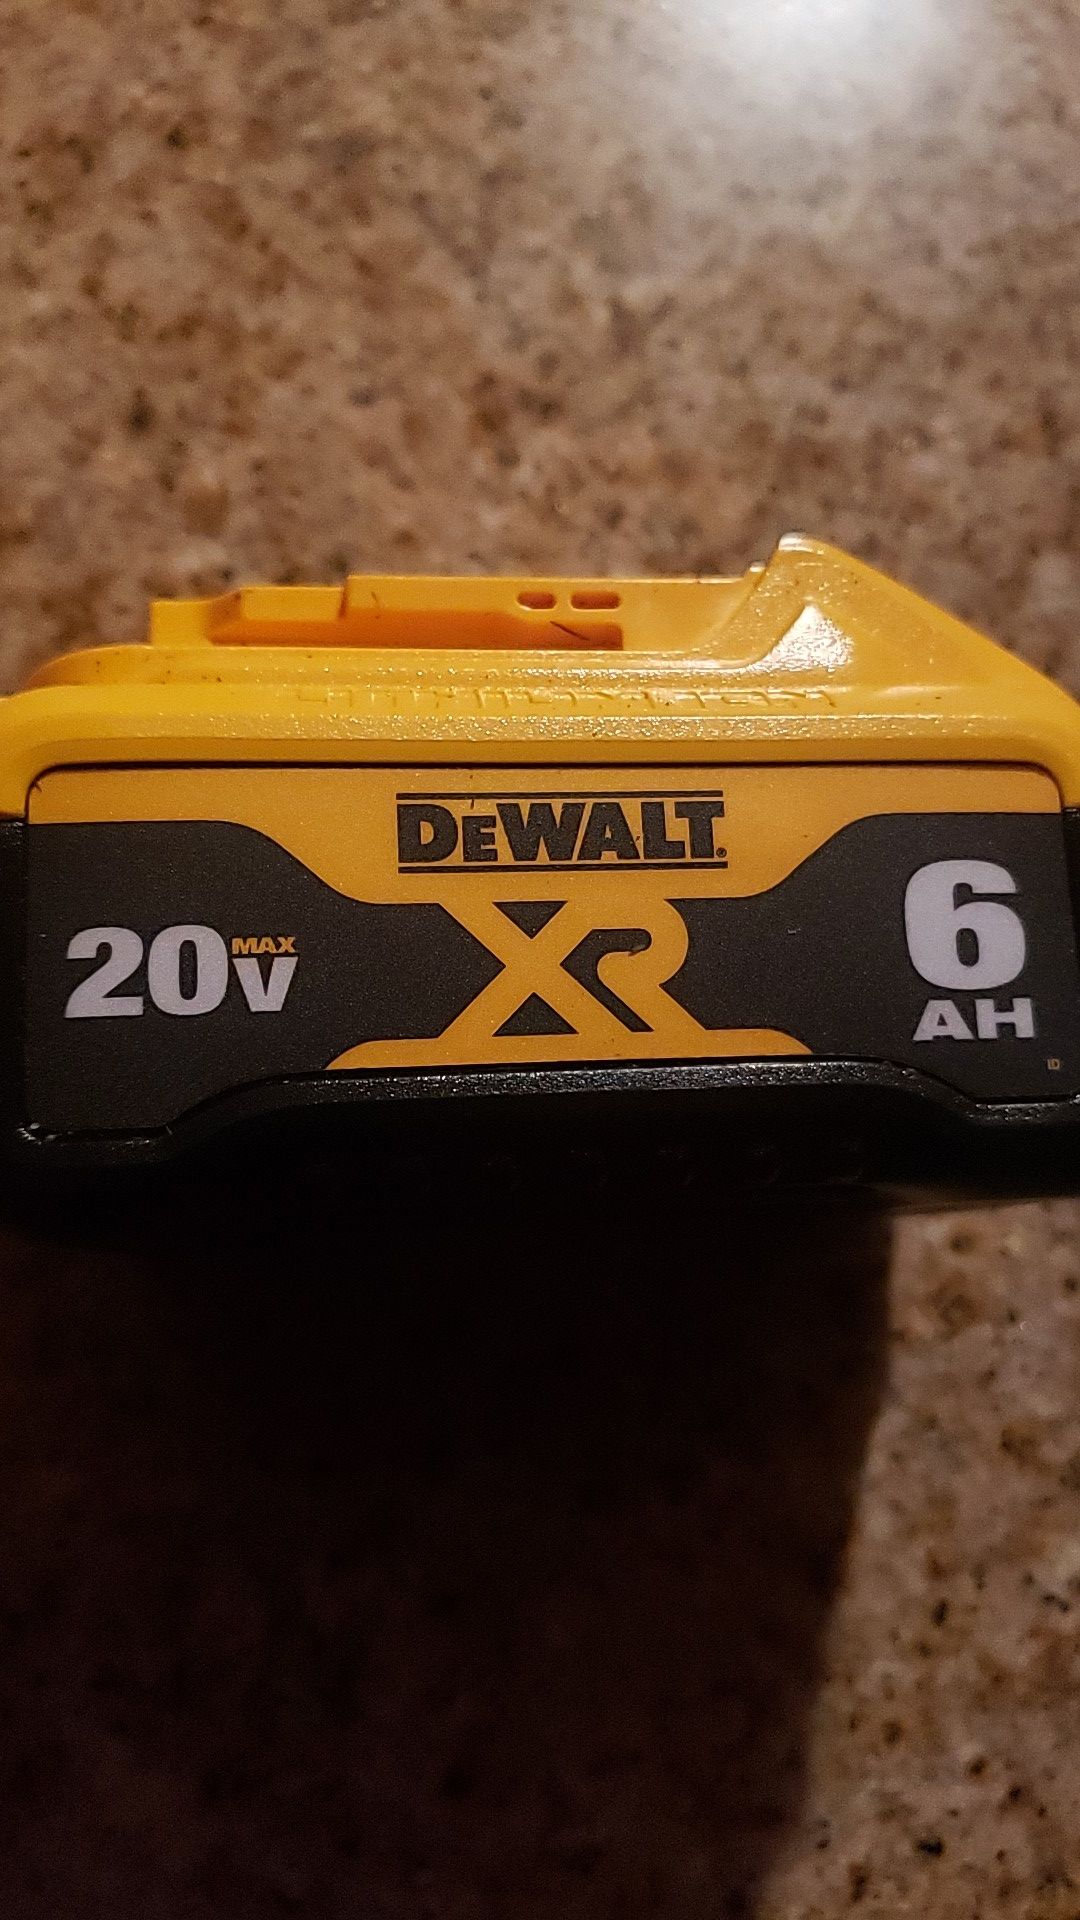 Dewalt 6ah Xr 20v batteries. 70 each. Price is firm. Pick up by MIDWAY AIRPORT!